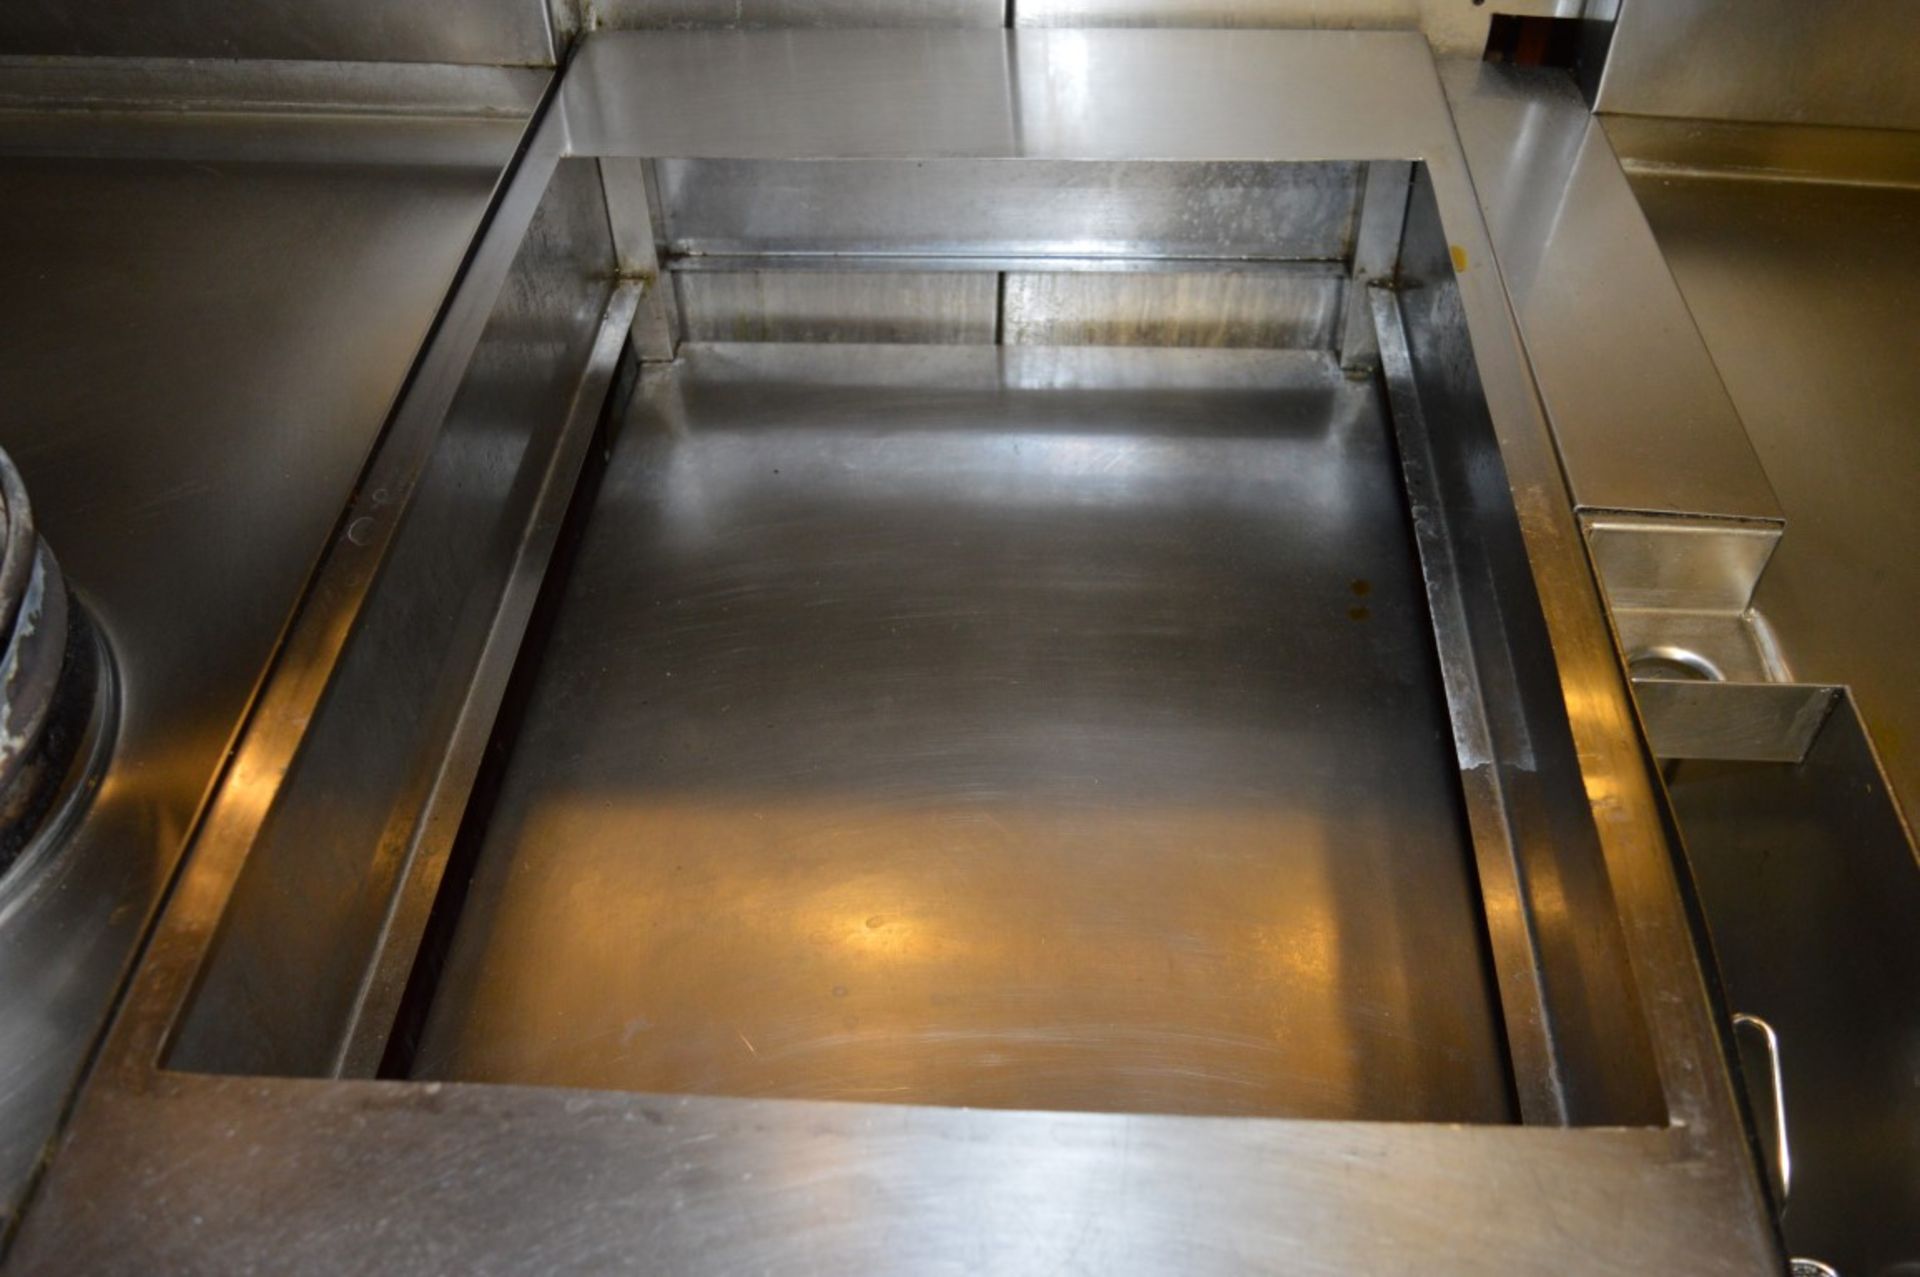 1 x Stainless Steel Commercial Sauce Tray Unit - Includes Two Trays - H80 x W56 x D97 cms - Ref - Image 2 of 4